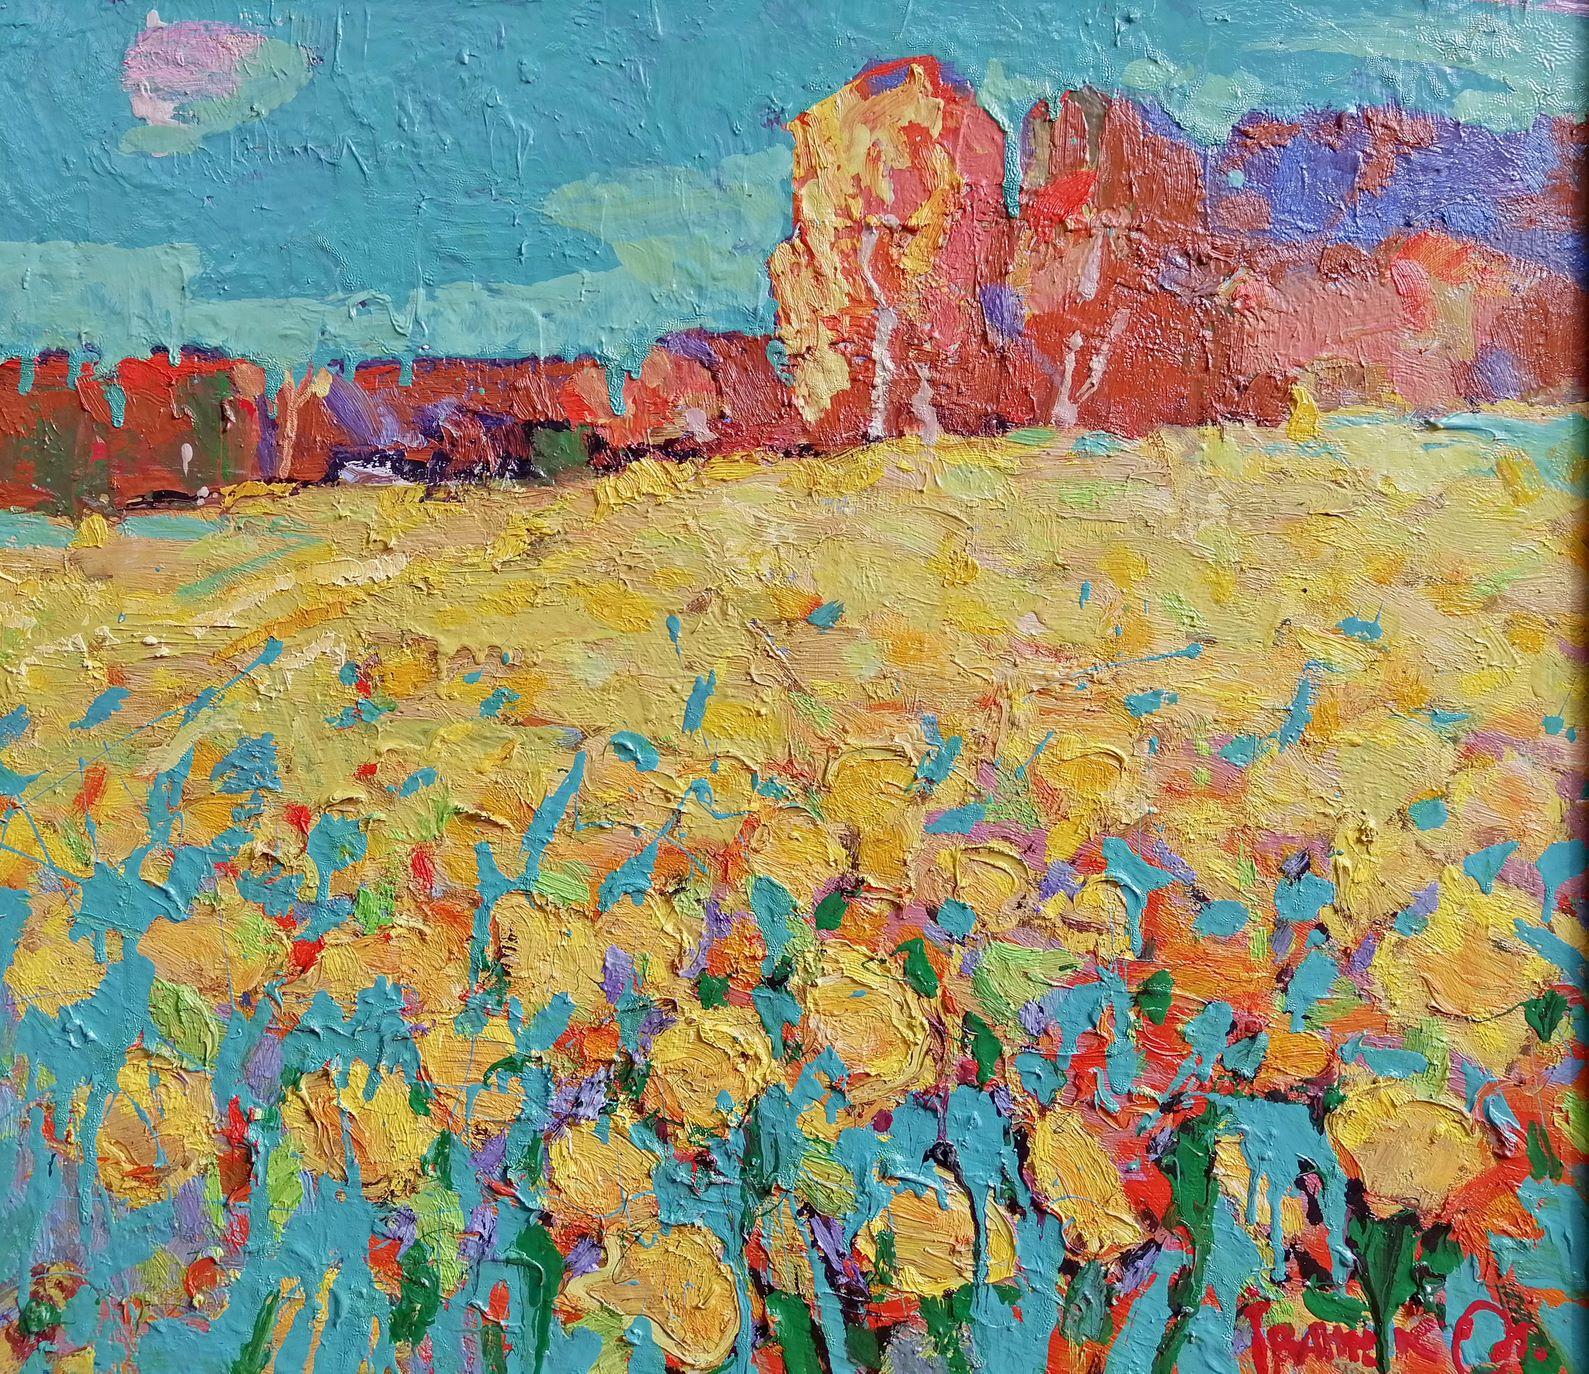 Sunflower Field, Original oil Painting, Ready to Hang